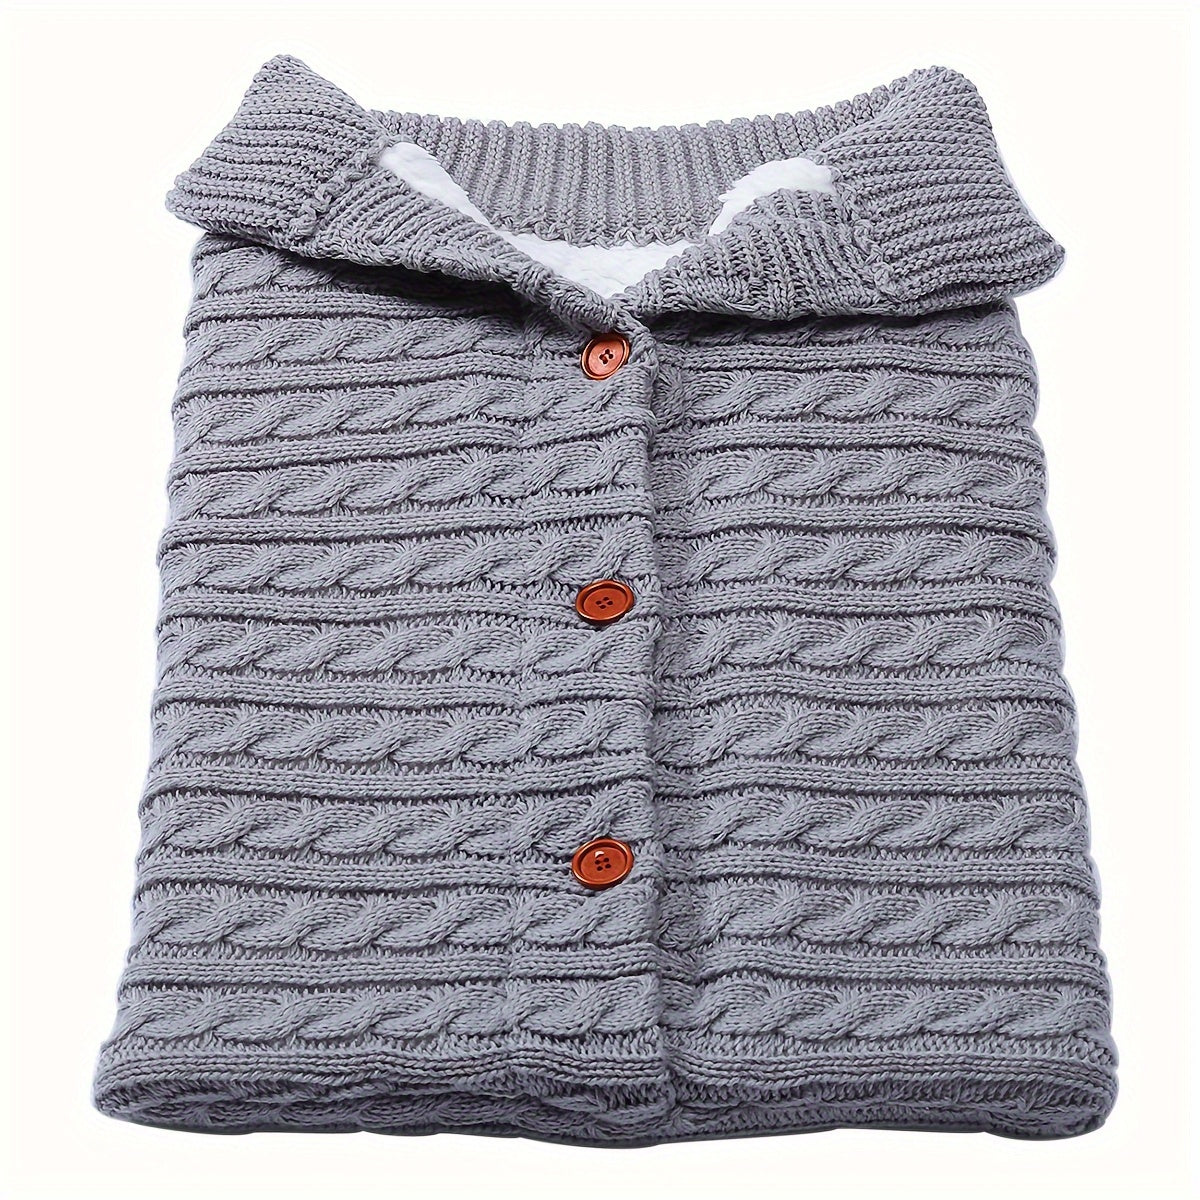 1pc Sleeping Bag, For Stroller Outdoor Use, Knitted Button Sleeping Bag, For Autumn And Winter, With Pile And Thick Blanket